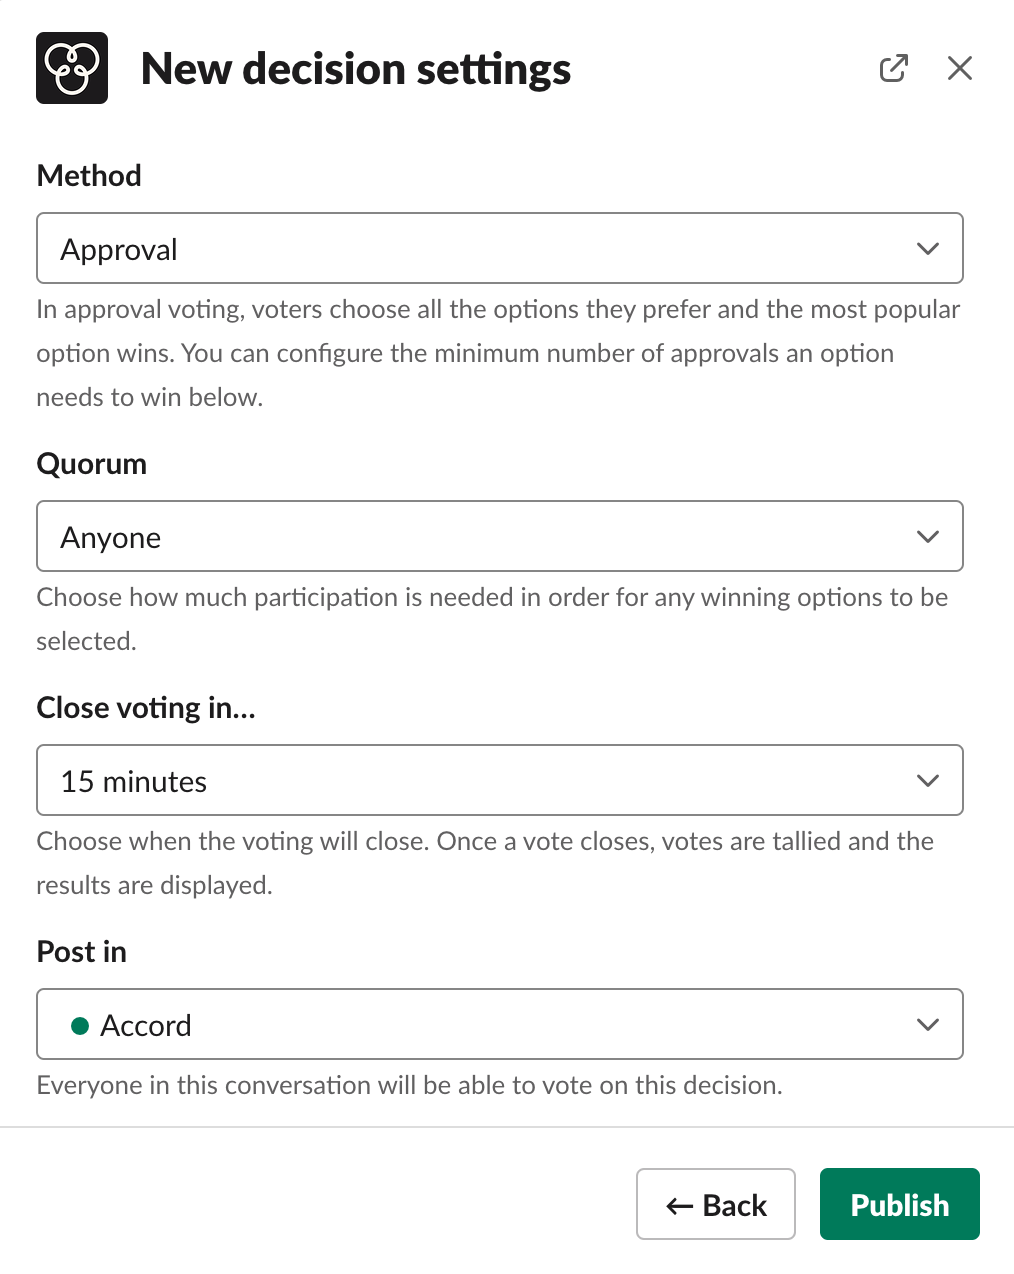 The settings step in the decision creation modal